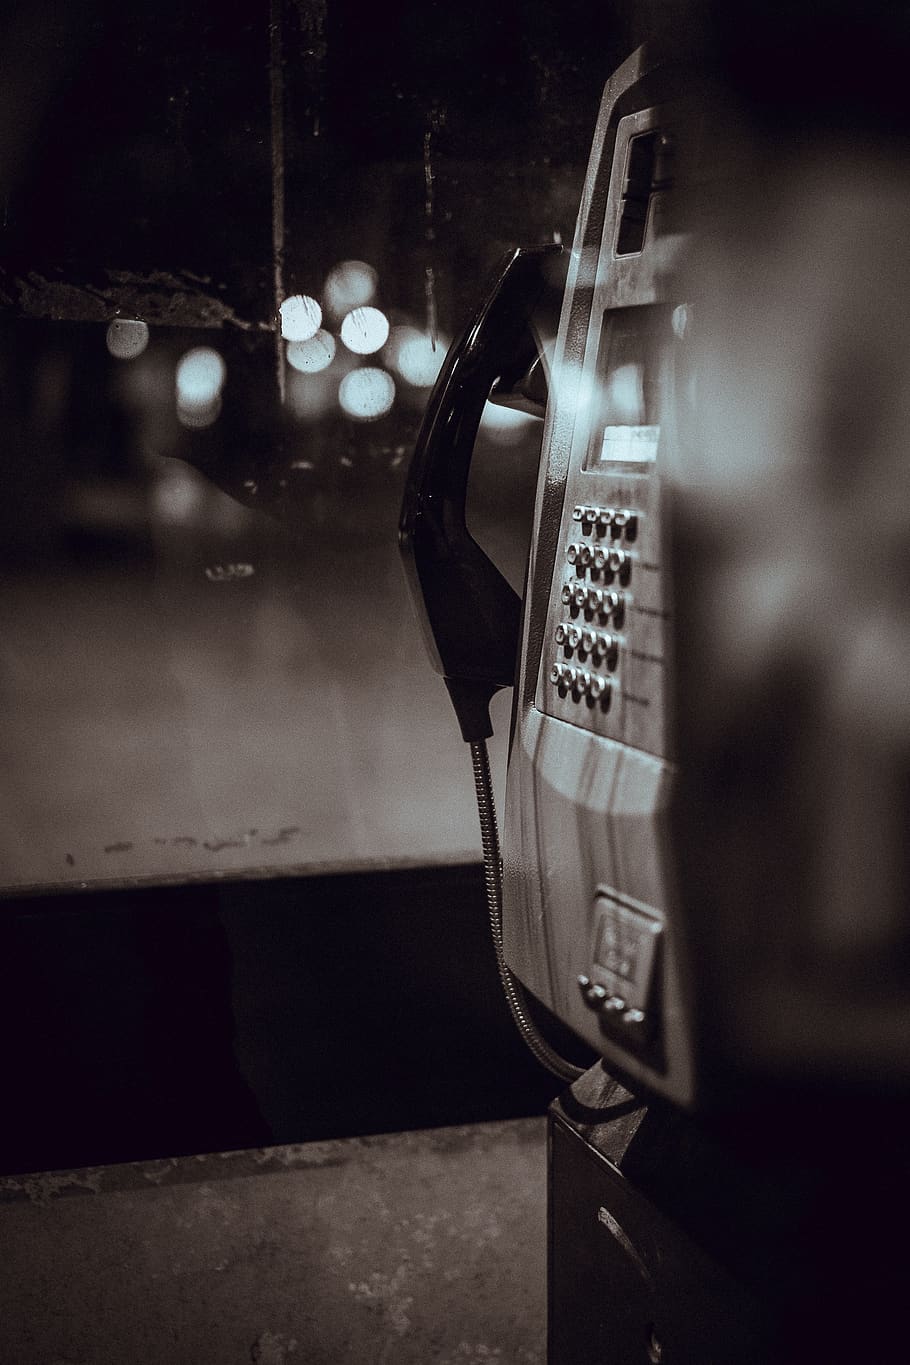 payphone, communication, call, telephone, black and white, bokeh, close-up, technology, retro styled, indoors